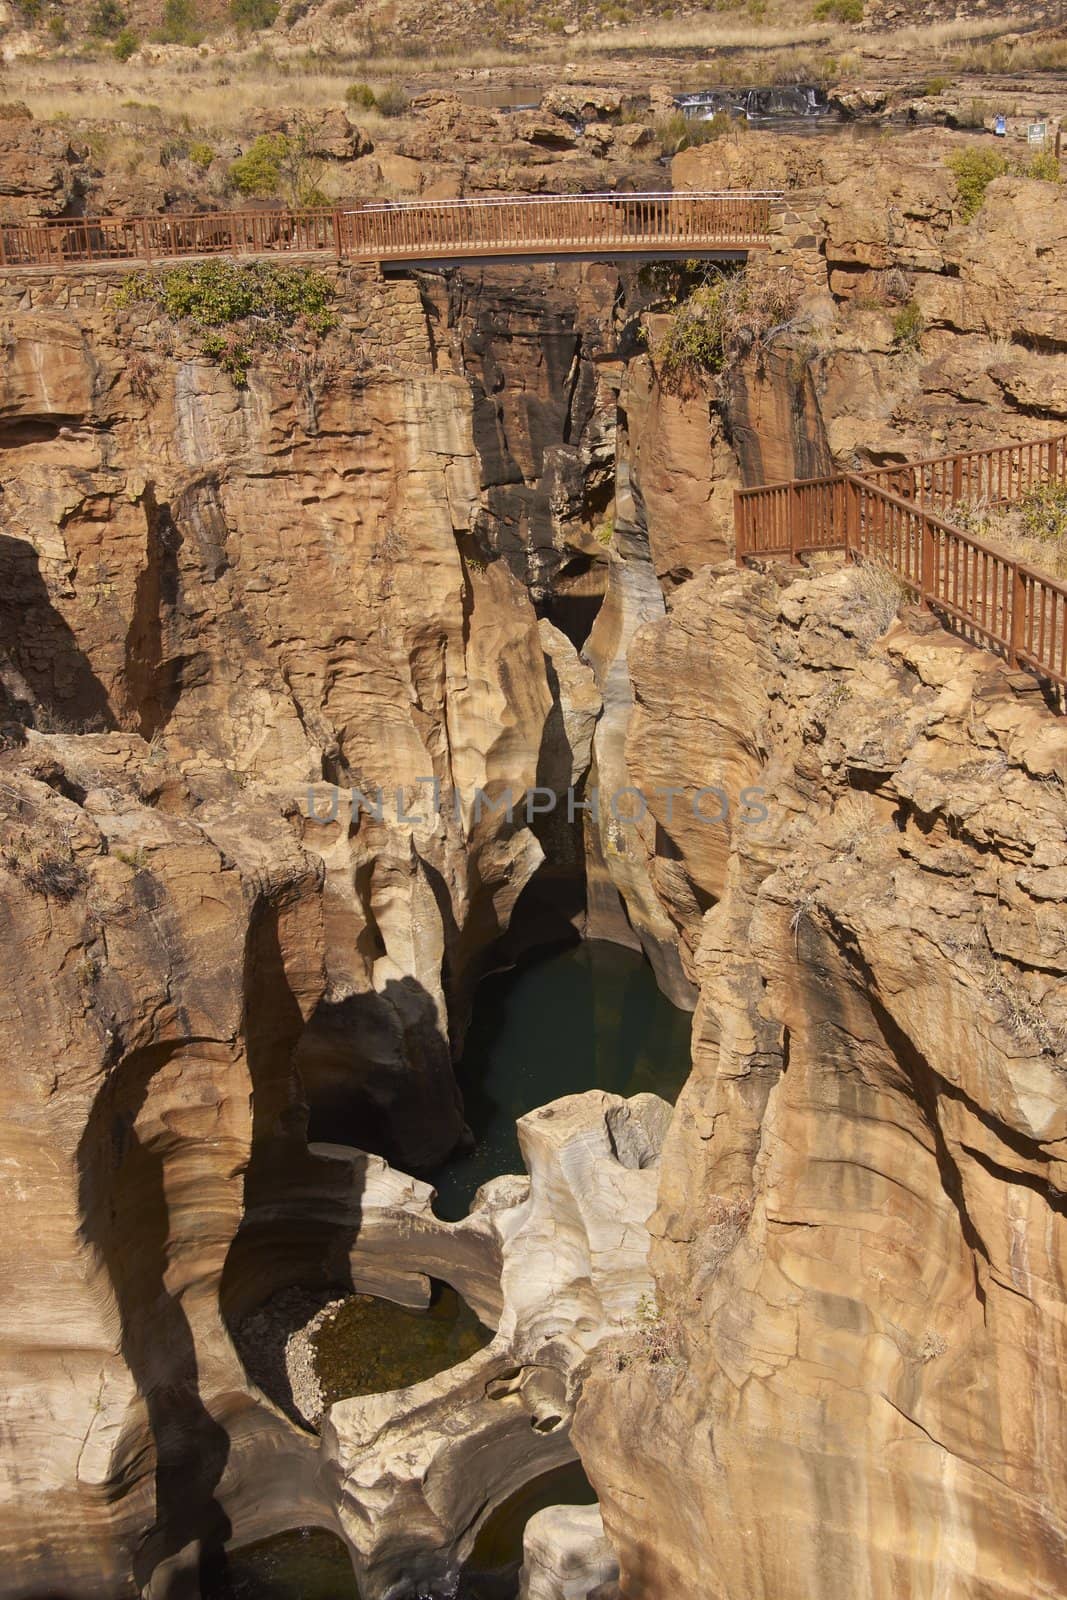 Eroded river canyon at Bourke's Luck Potholes on the Blyde River in Mpumalanga, South Africa